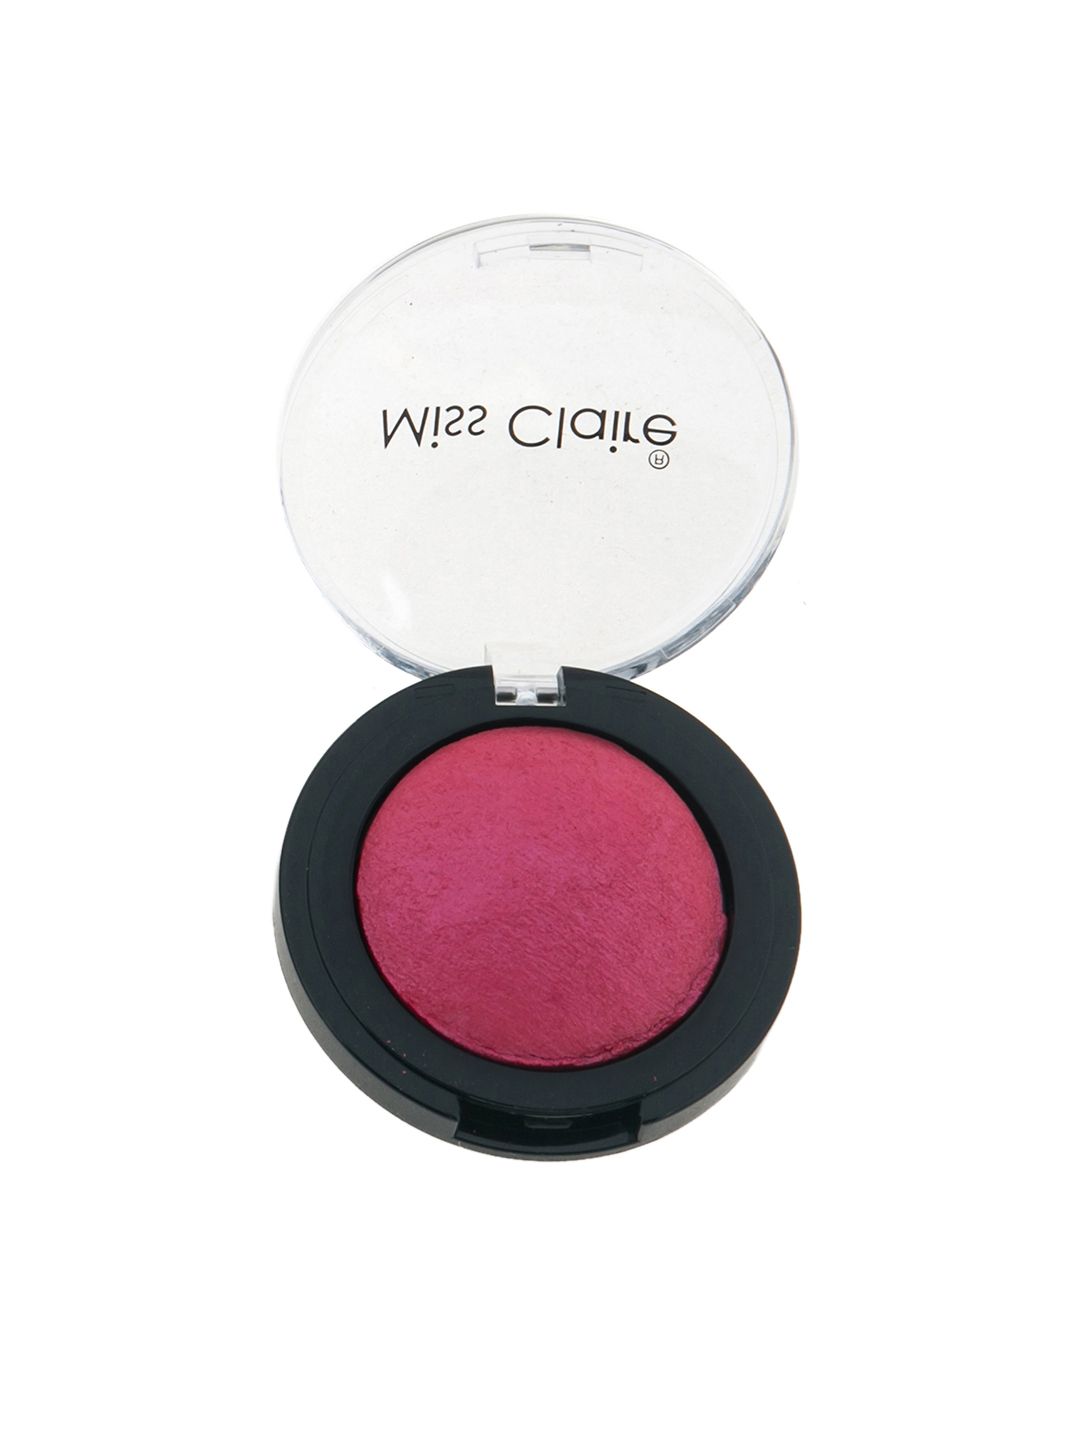 Miss Claire 21 Baked Eyeshadow 3.5g Price in India